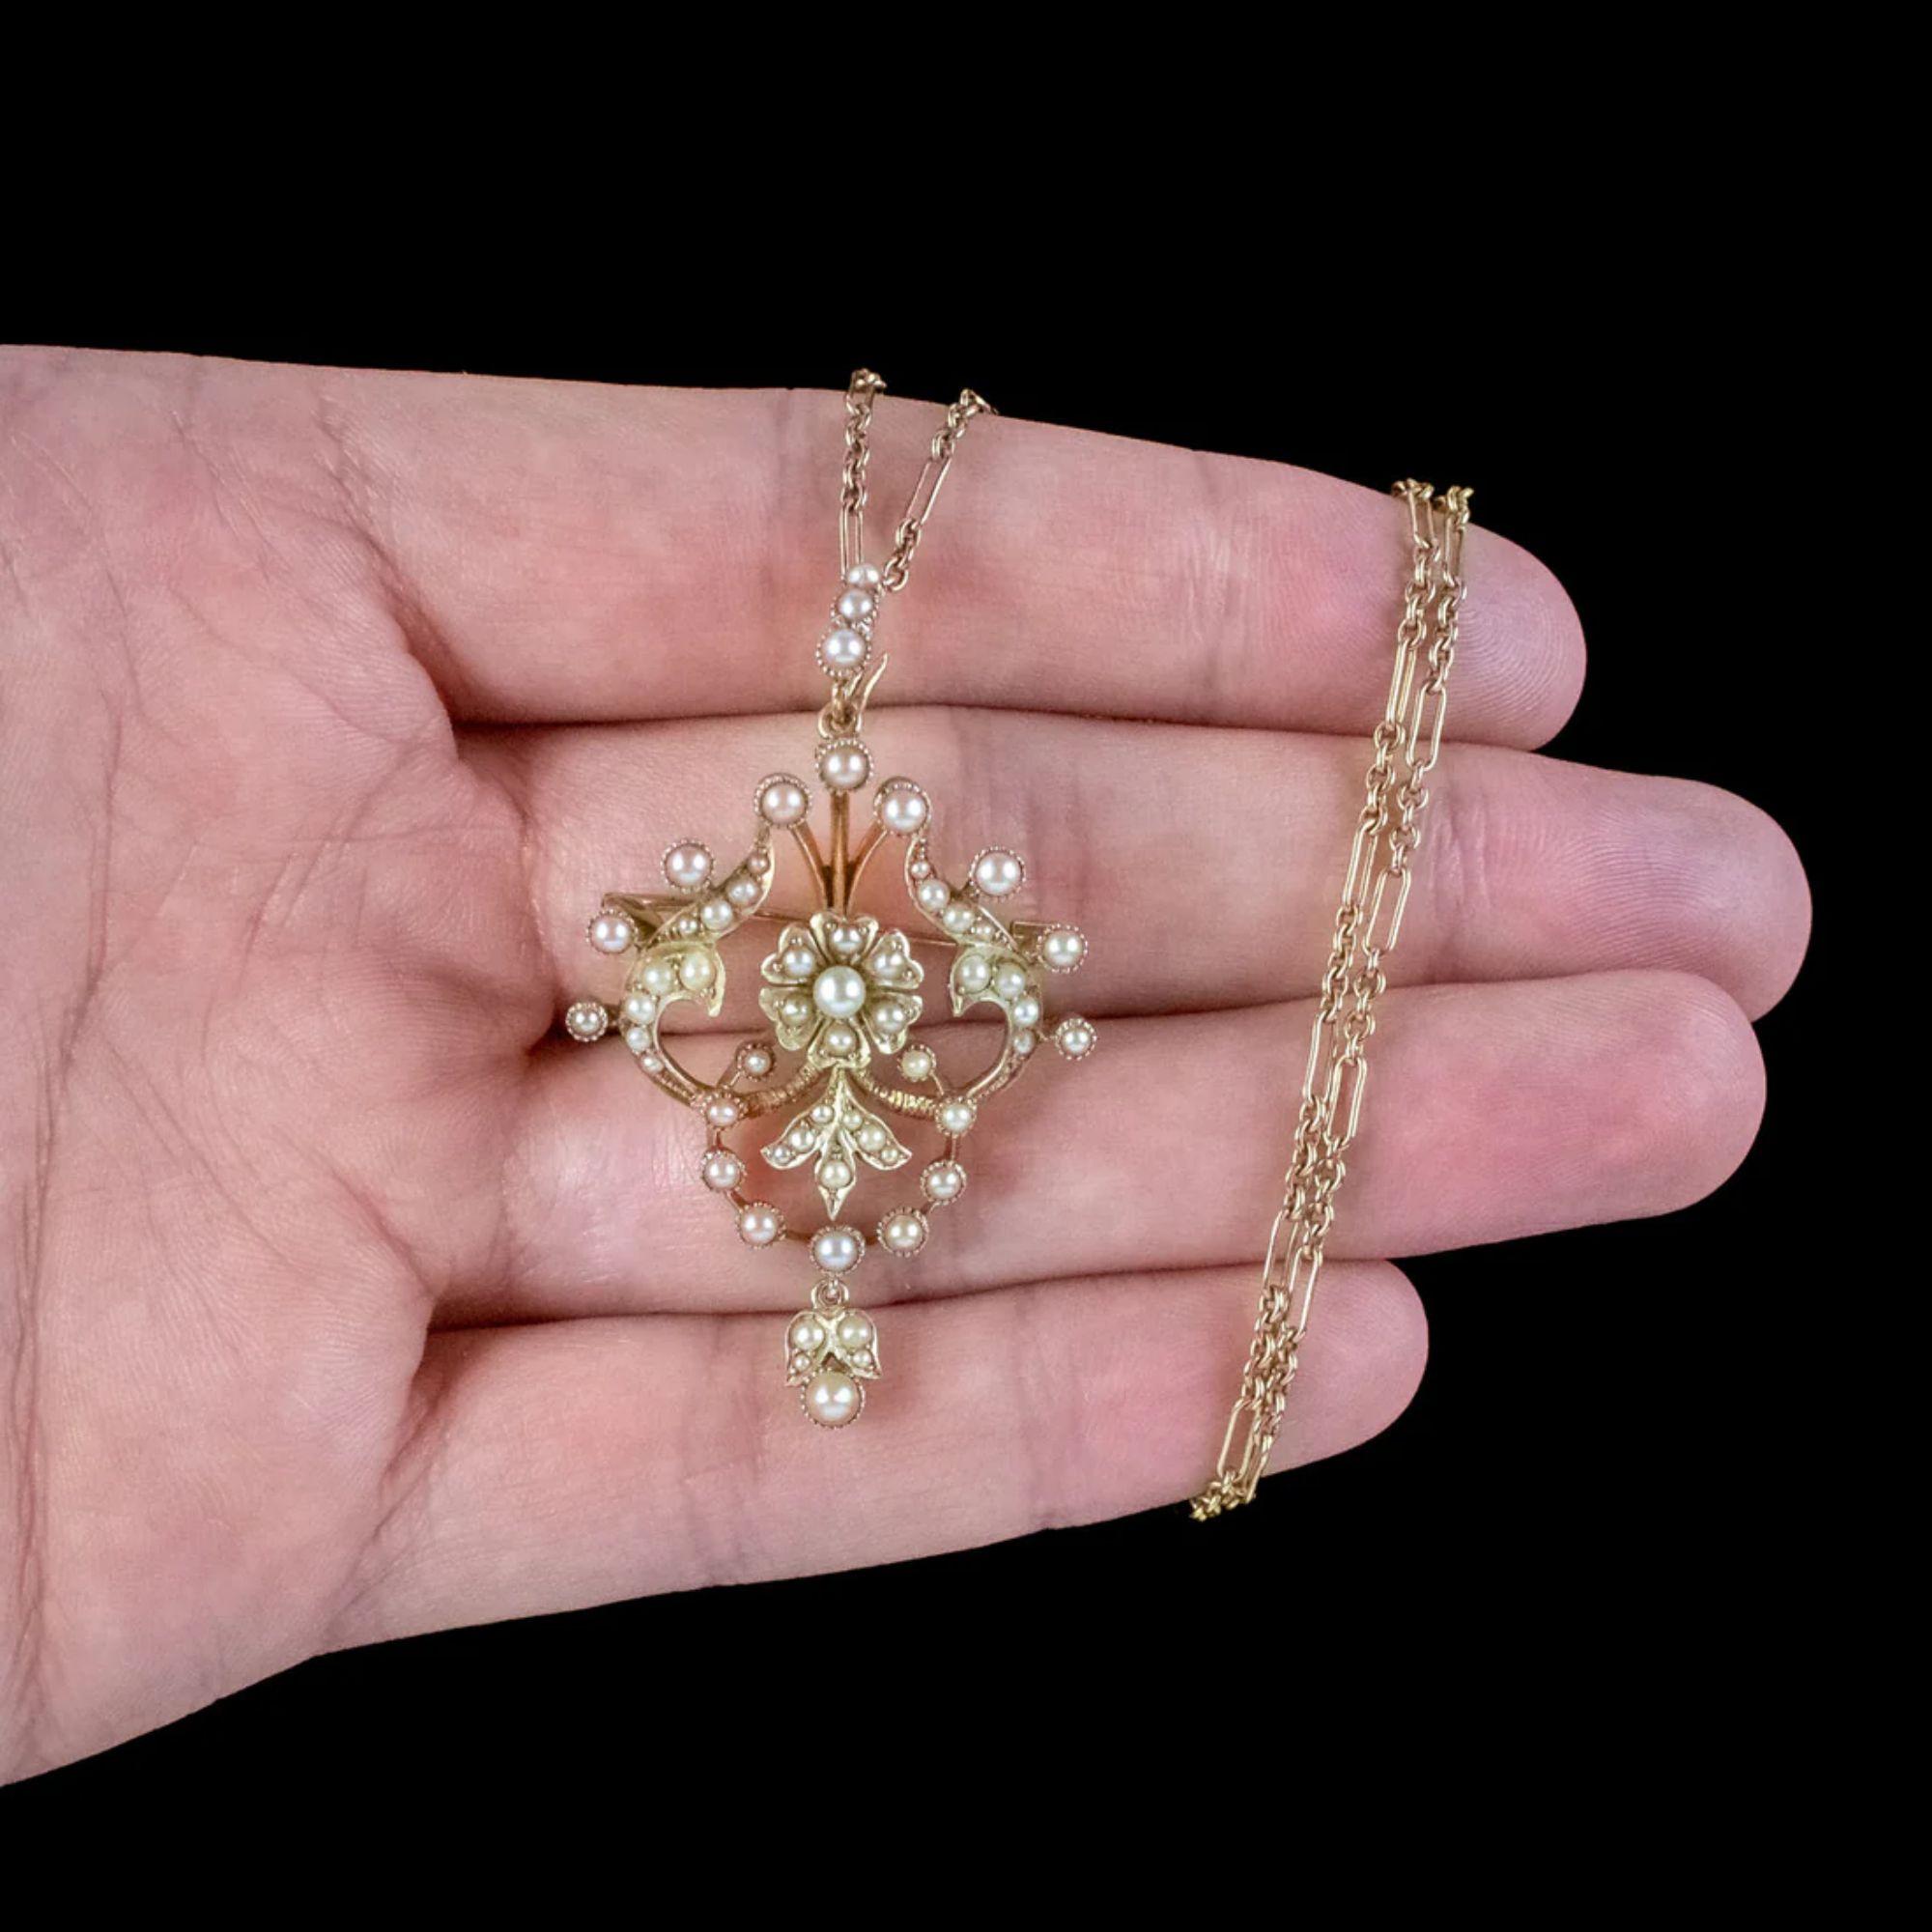 Women's Antique Edwardian Pearl Pendant Necklace in 15ct Gold, circa 1901-1915 For Sale